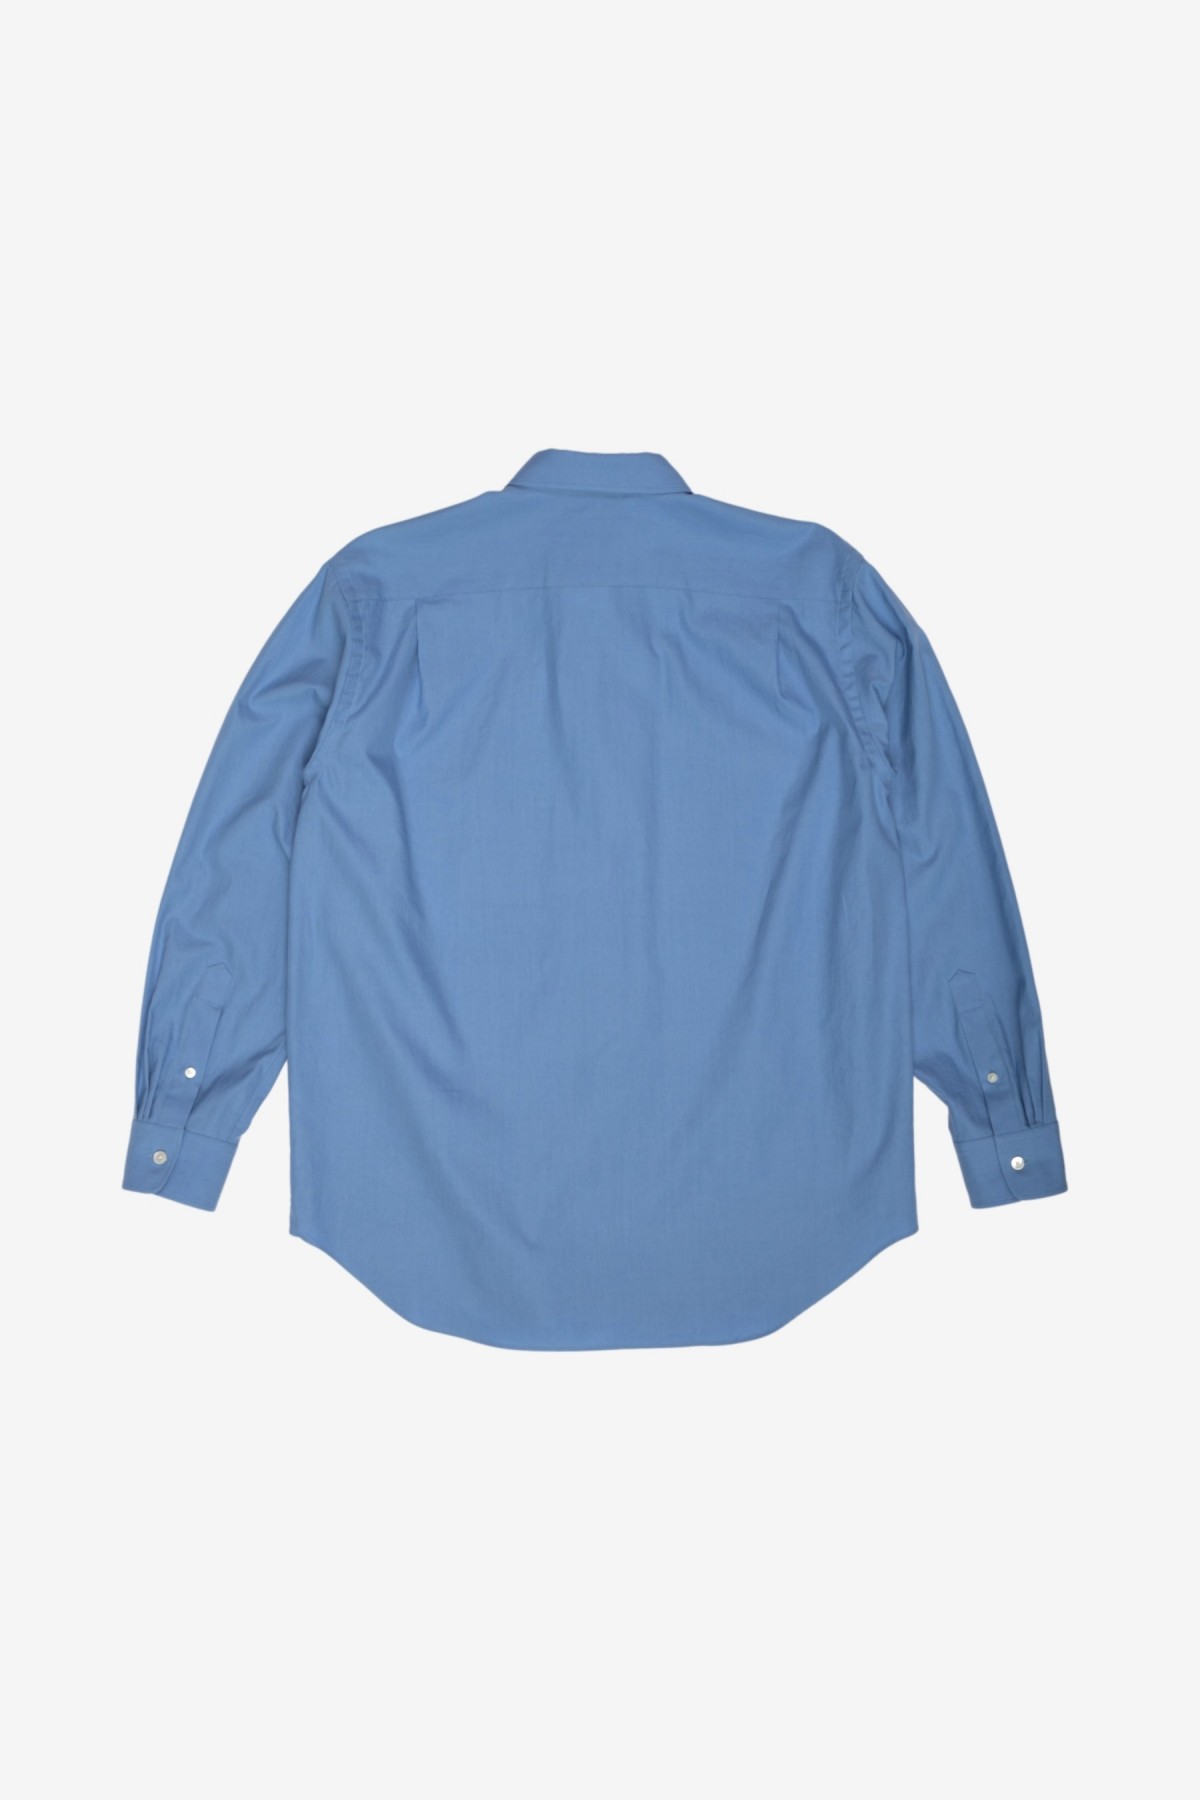 Washed Finx Twill Shirts in Twill Blue - Auralee | Afura Store